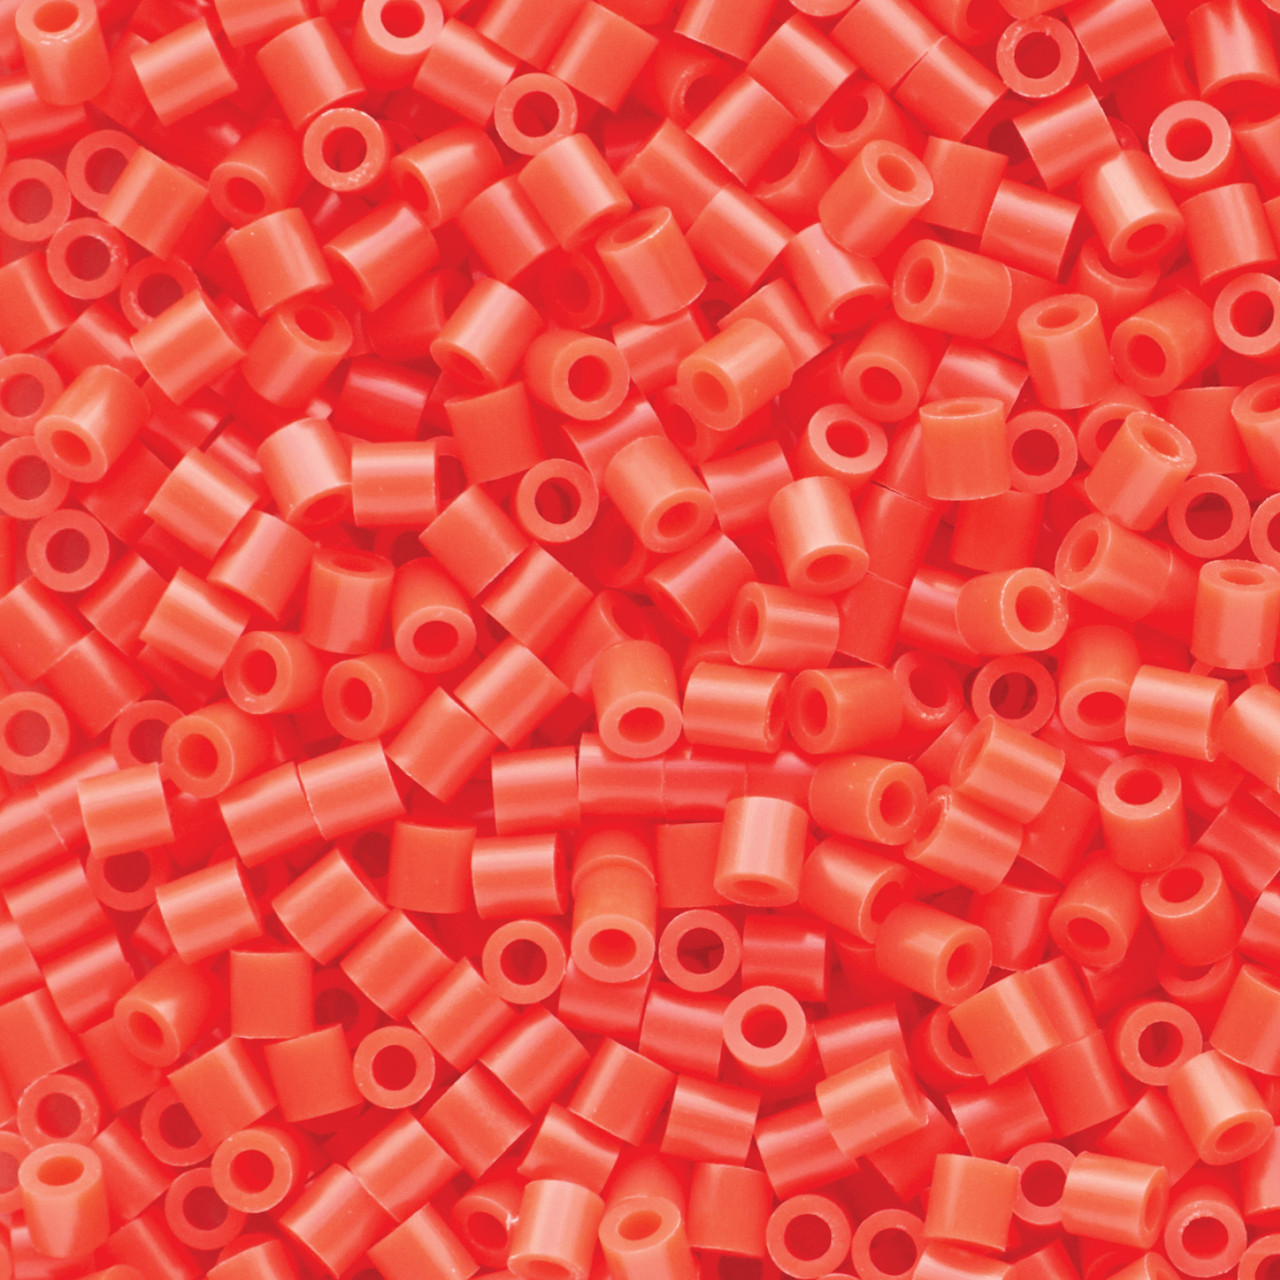 Red Translucent Fuse Beads - 5mm - 1000/Pack